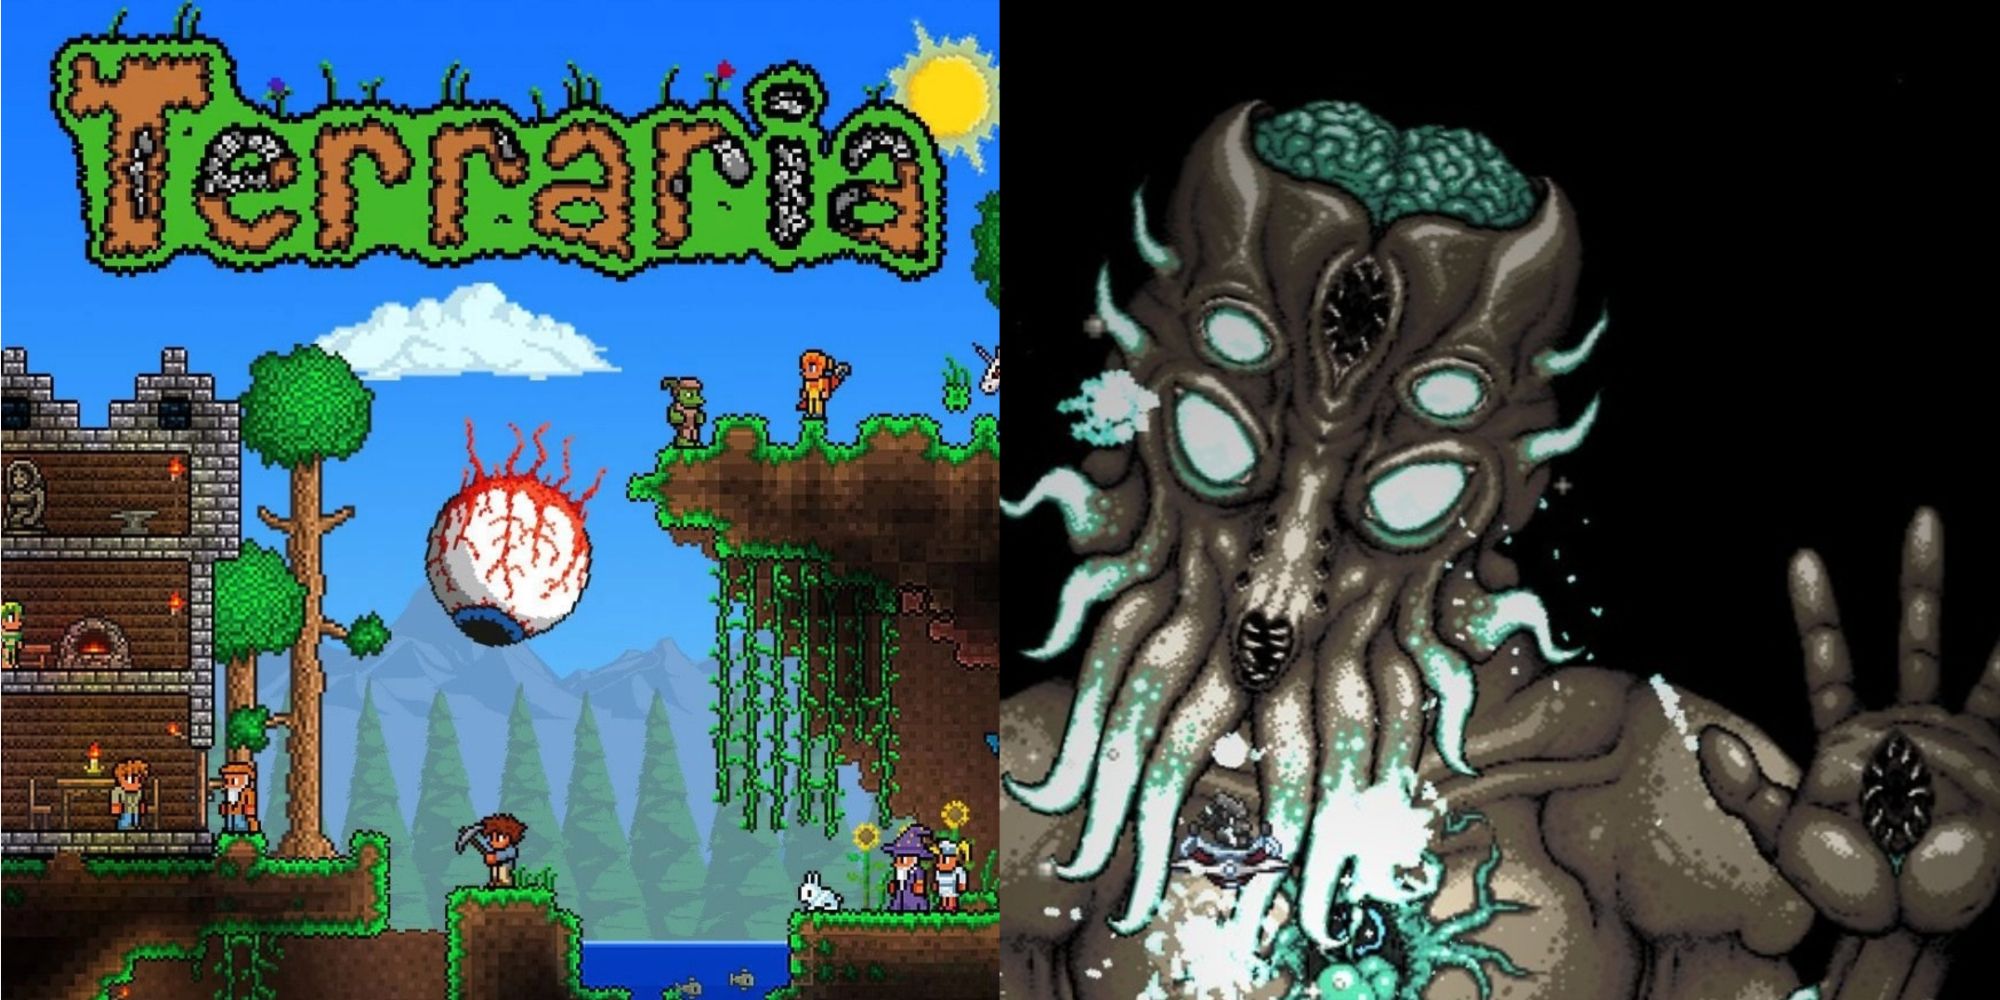 Are there any secret bosses after the Moon Lord in Terraria (with